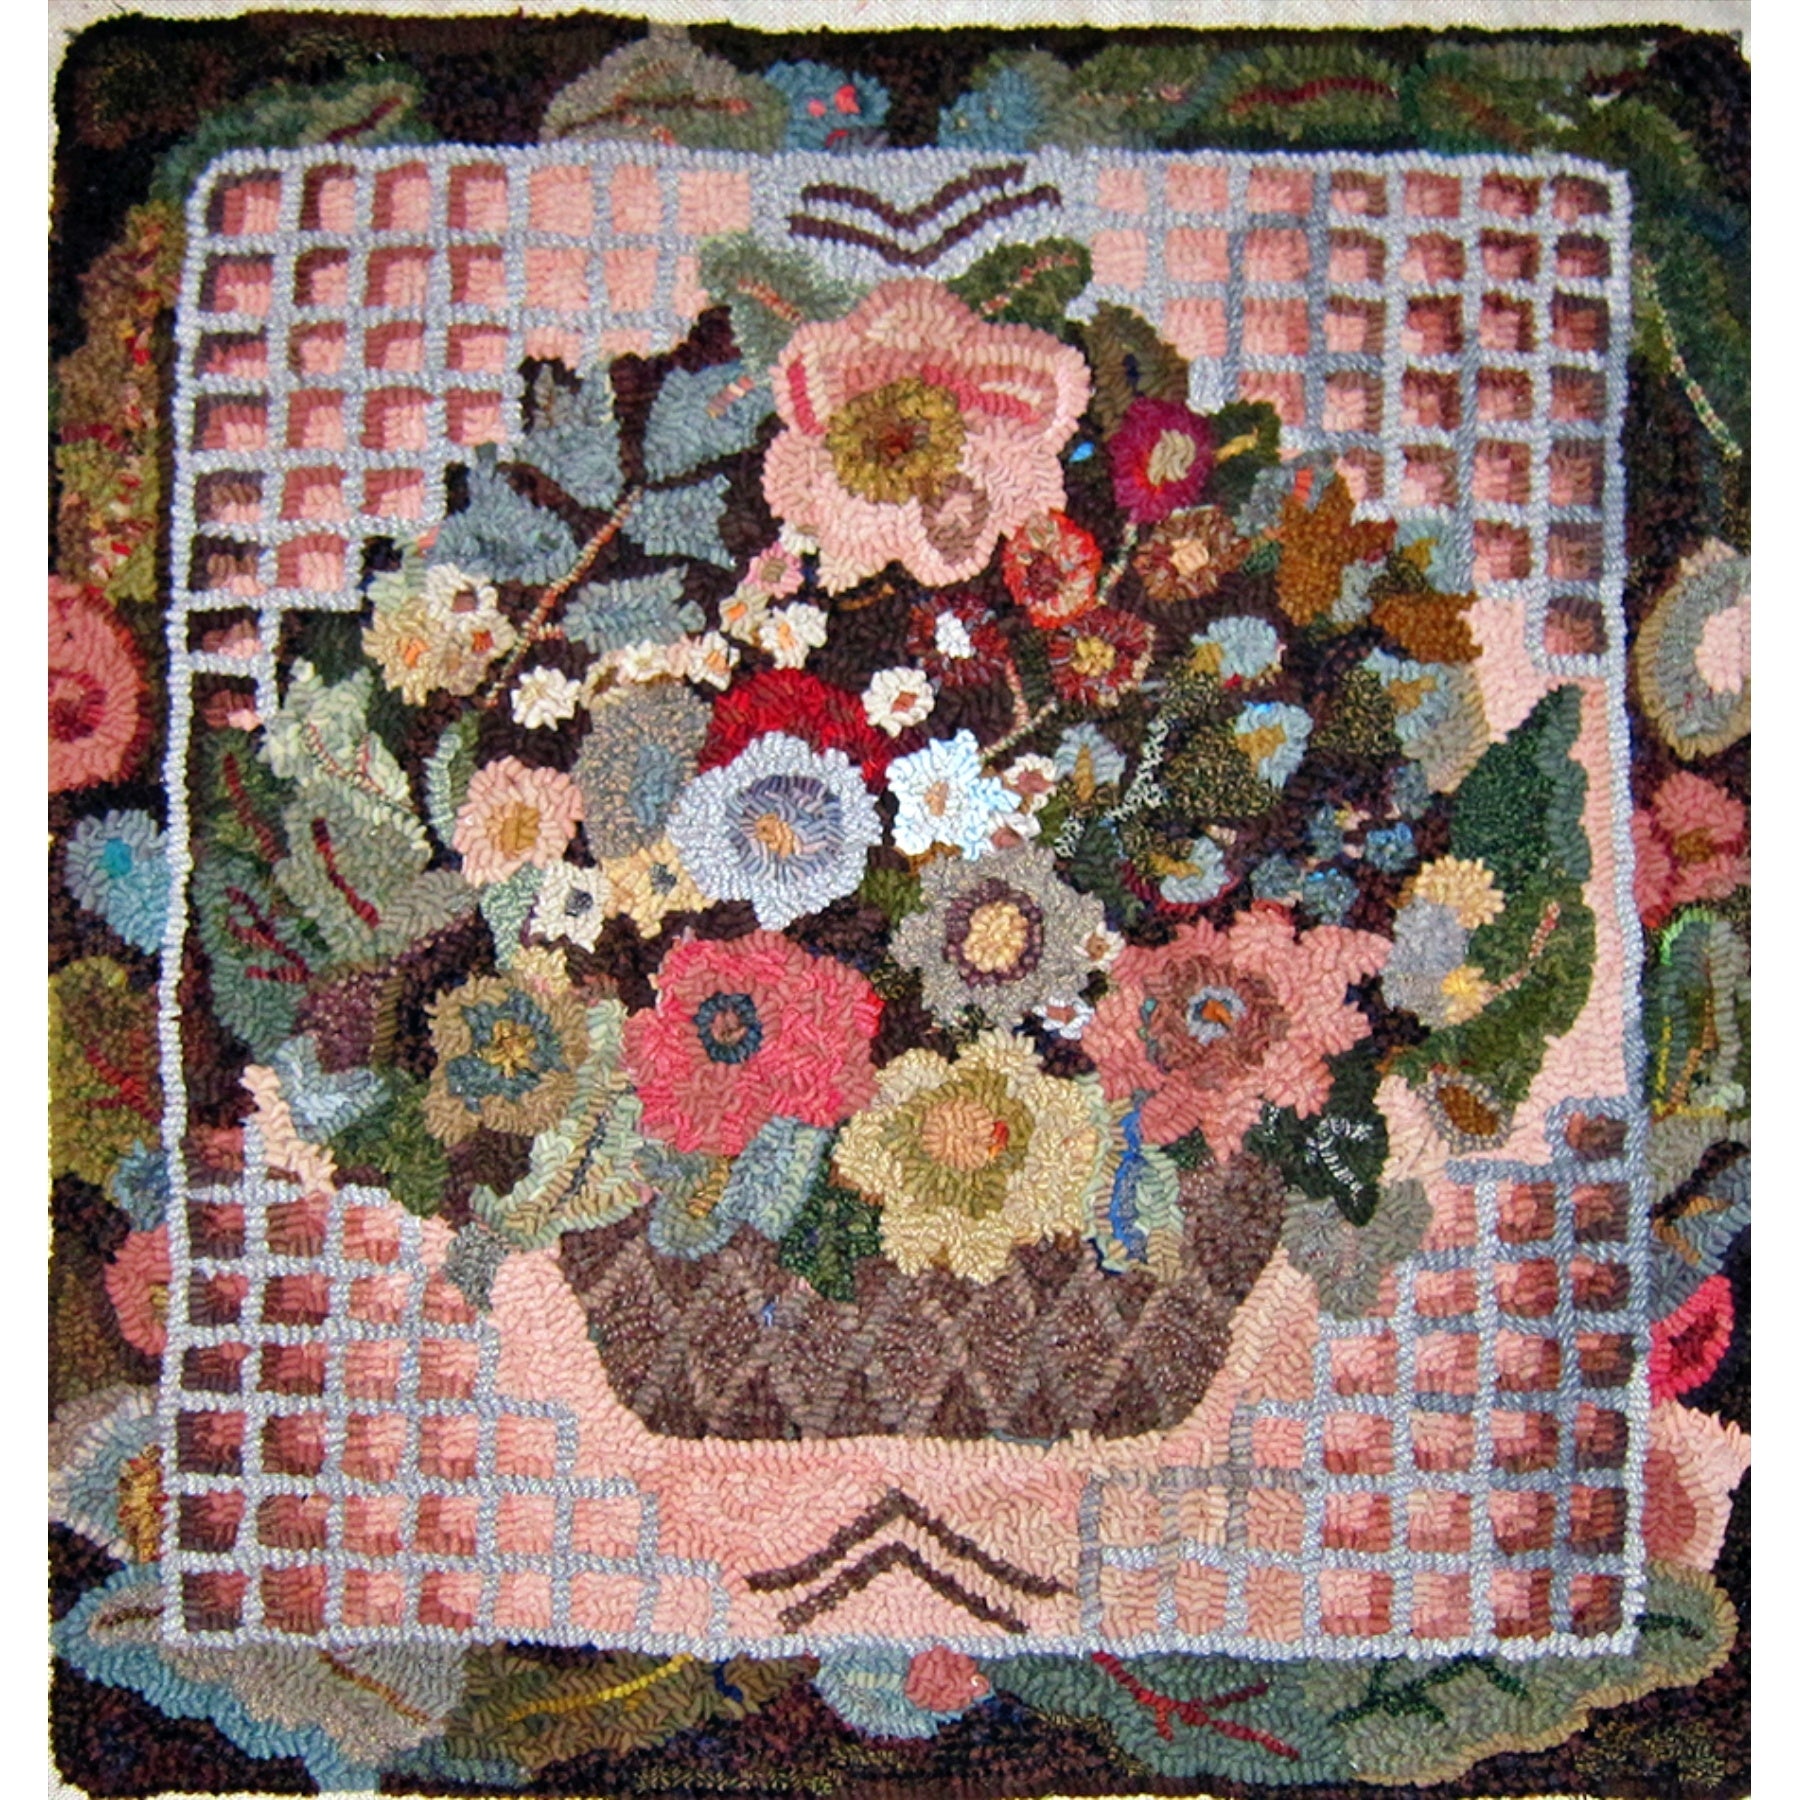 Antique Floral Adapation, rug hooked by Cheryl Bollenbach